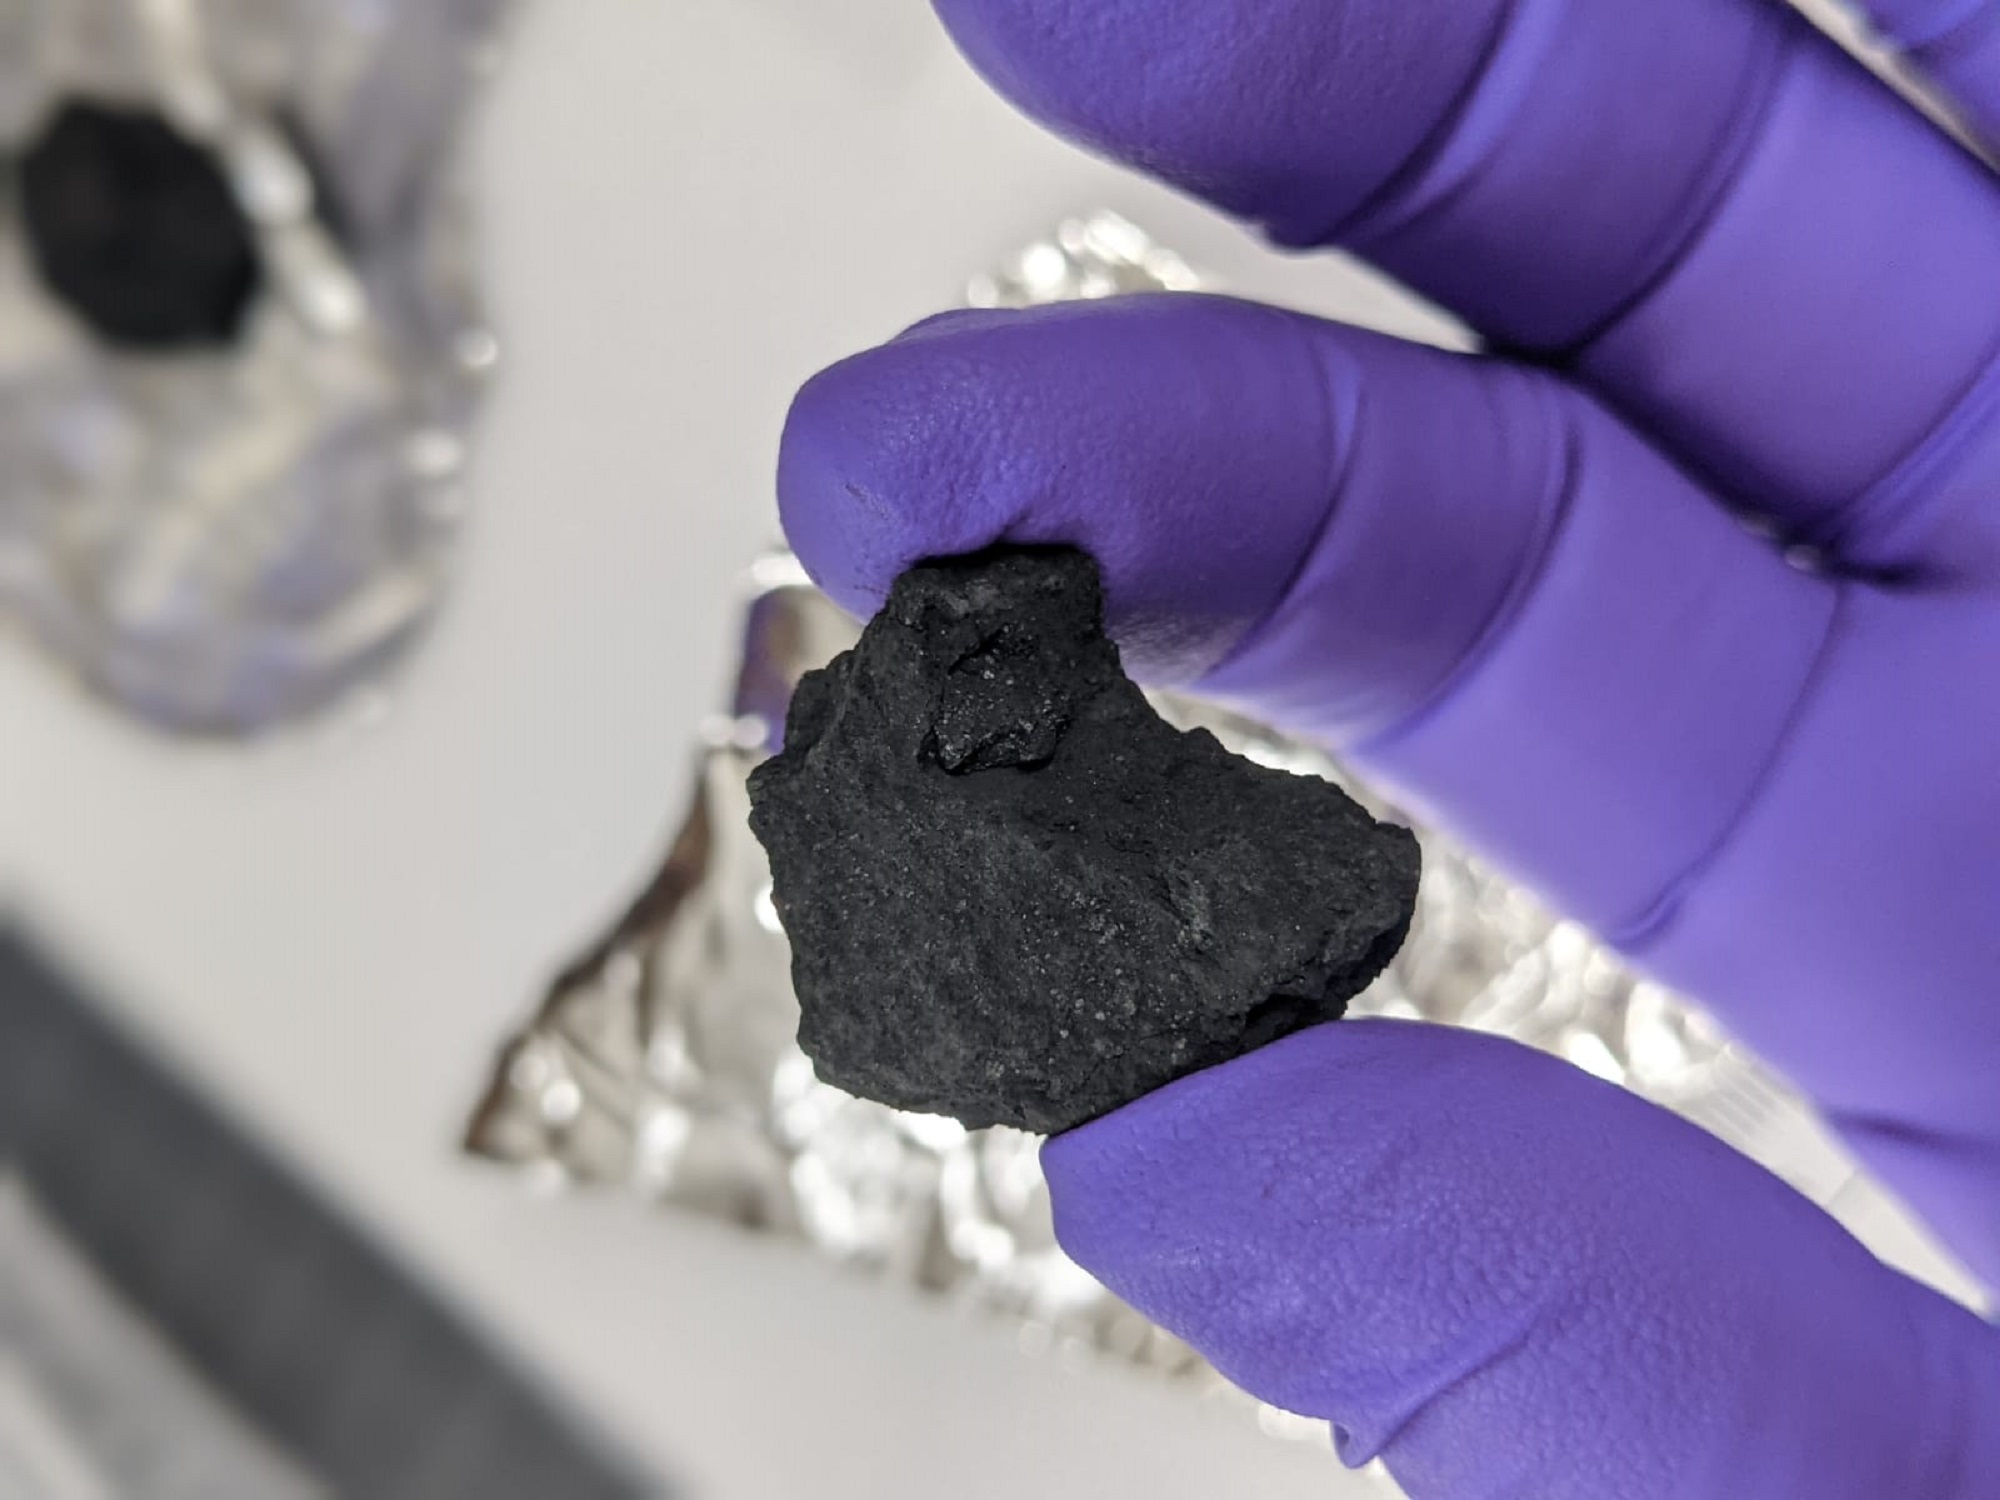 Winchcombe meteorite fragment in a purple-gloved hand for chemical analysis